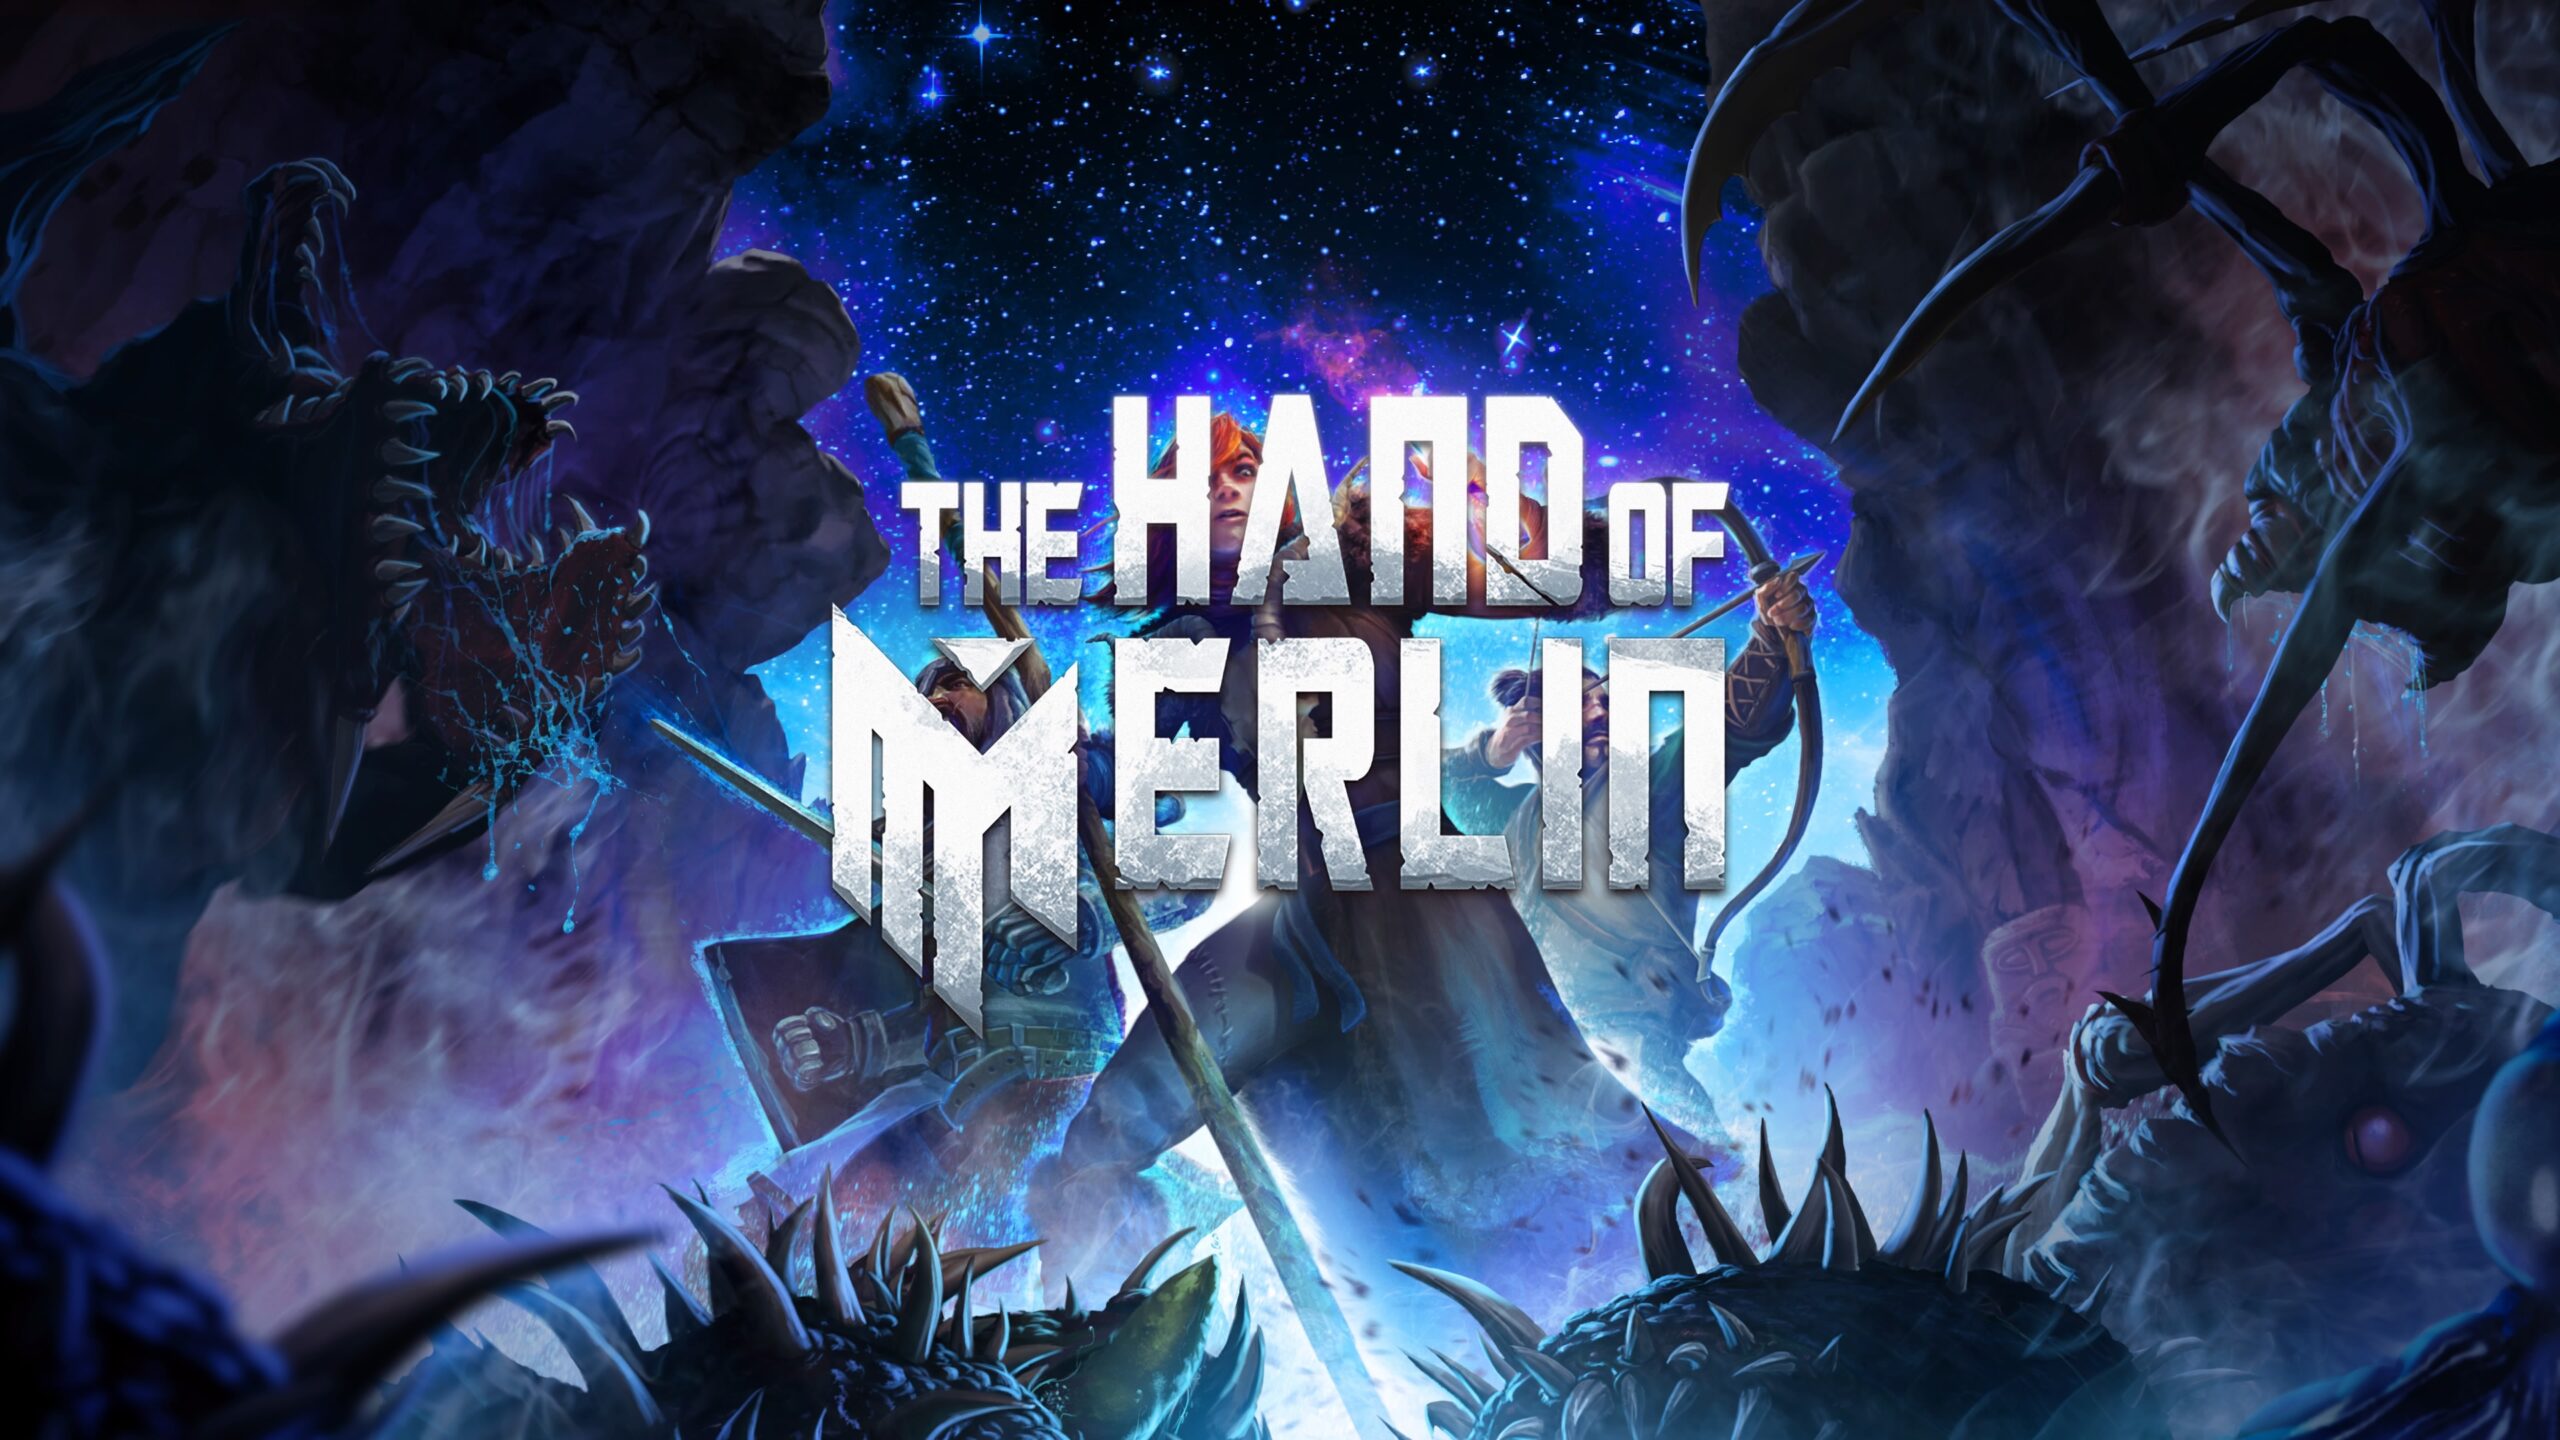 The Hand of Merlin for android instal